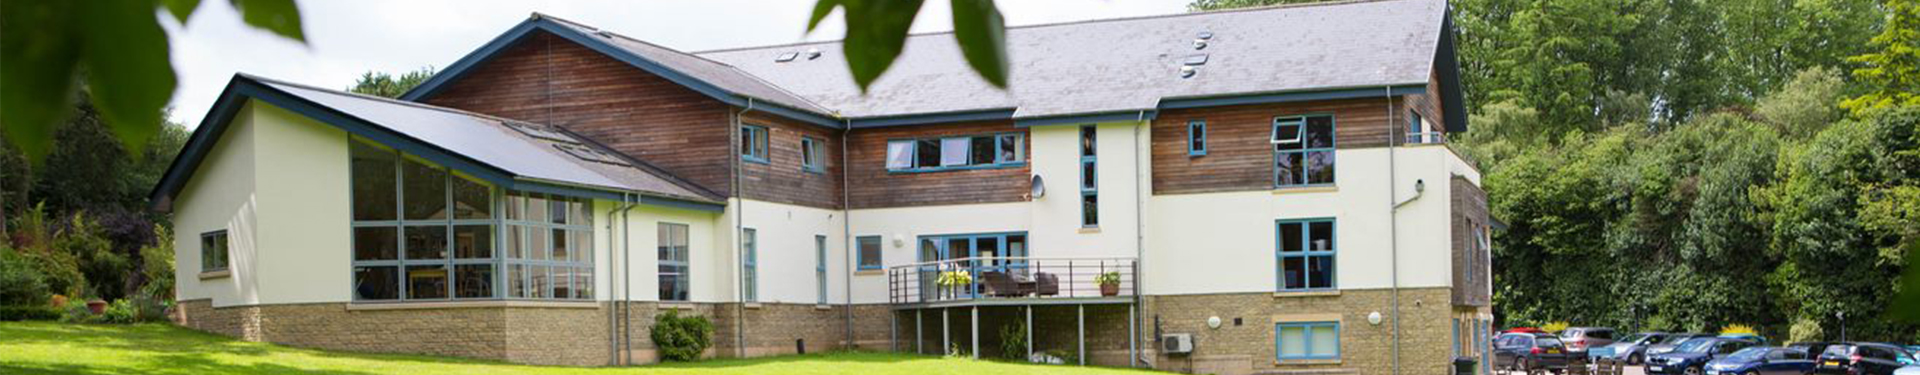 banner image of hospice building